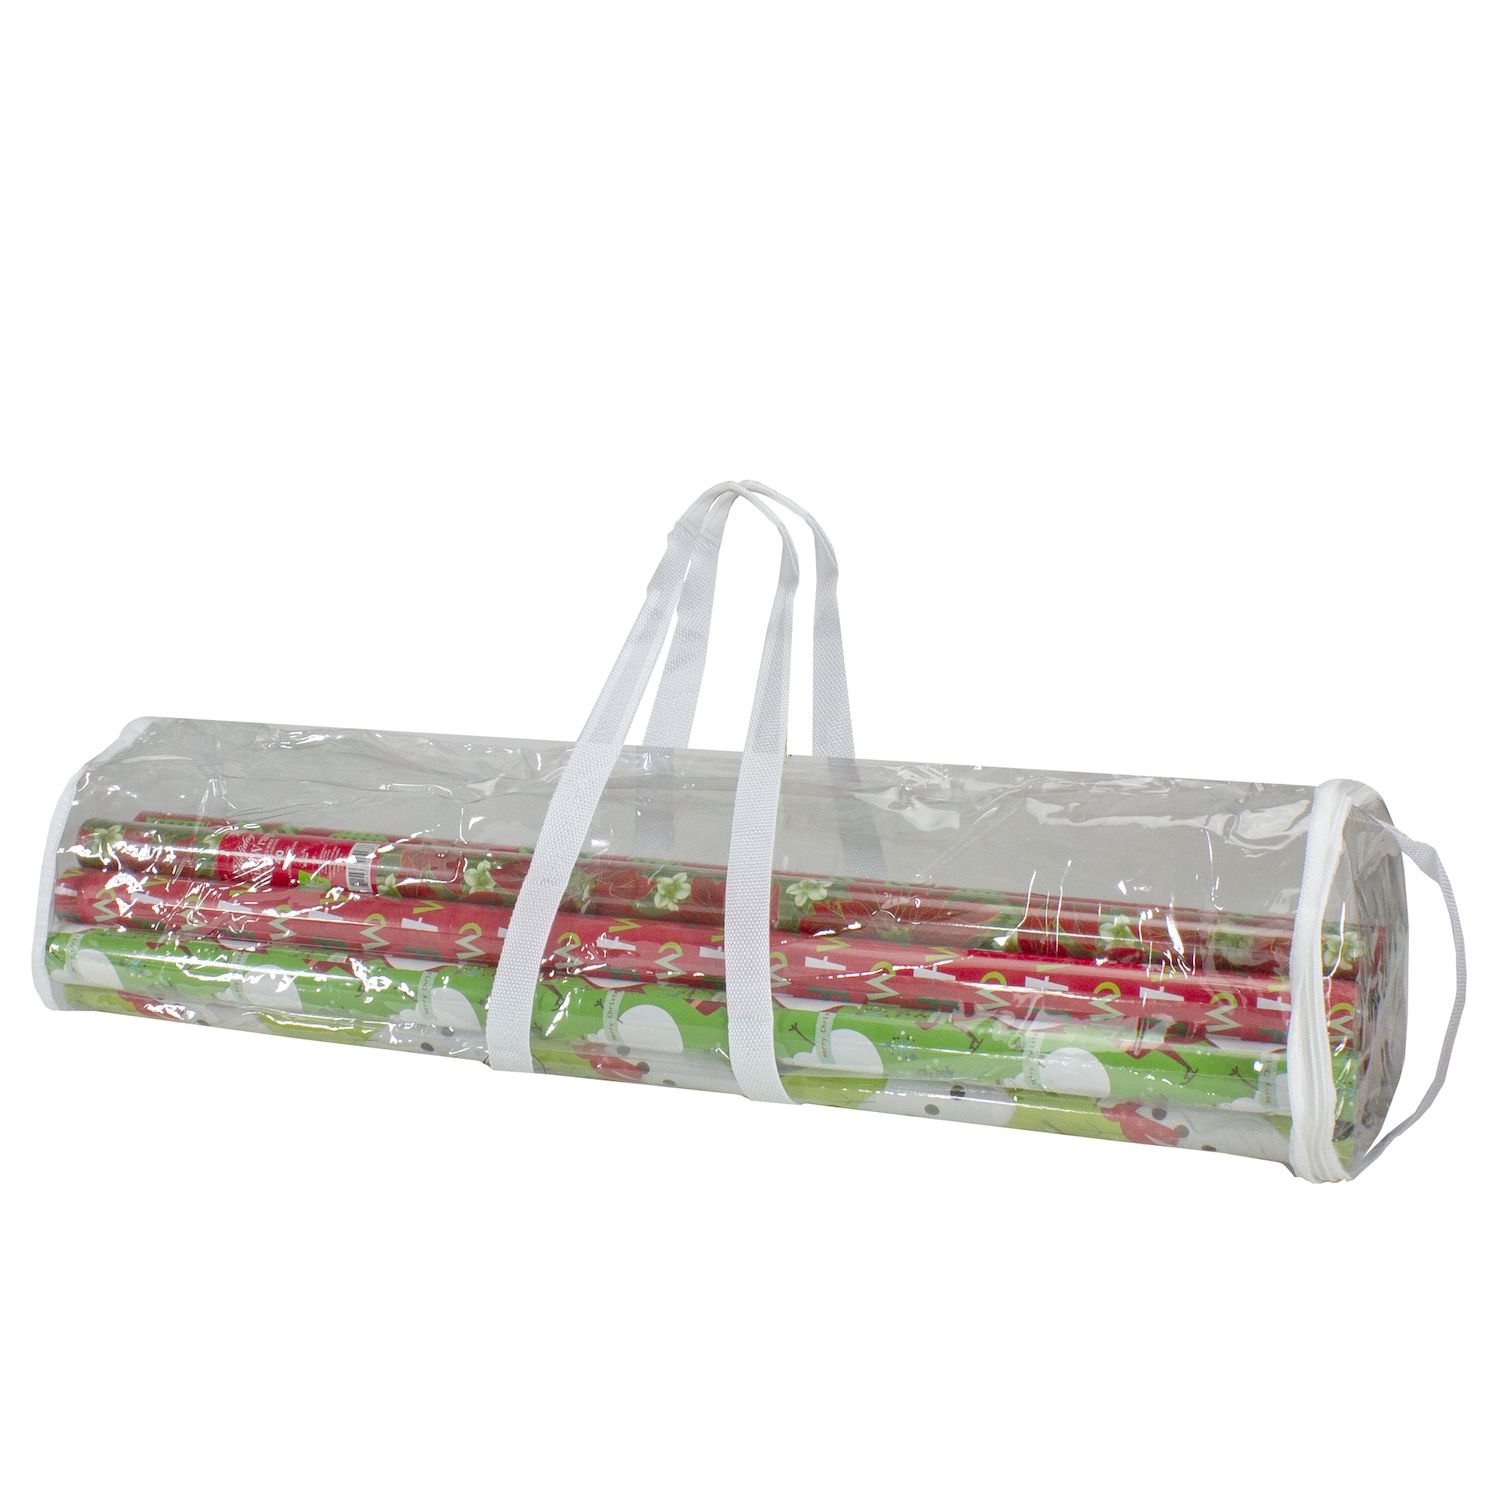 2 Pack Wrapping Paper Storage Bag, 40 inch Gift Wrap Organizer for